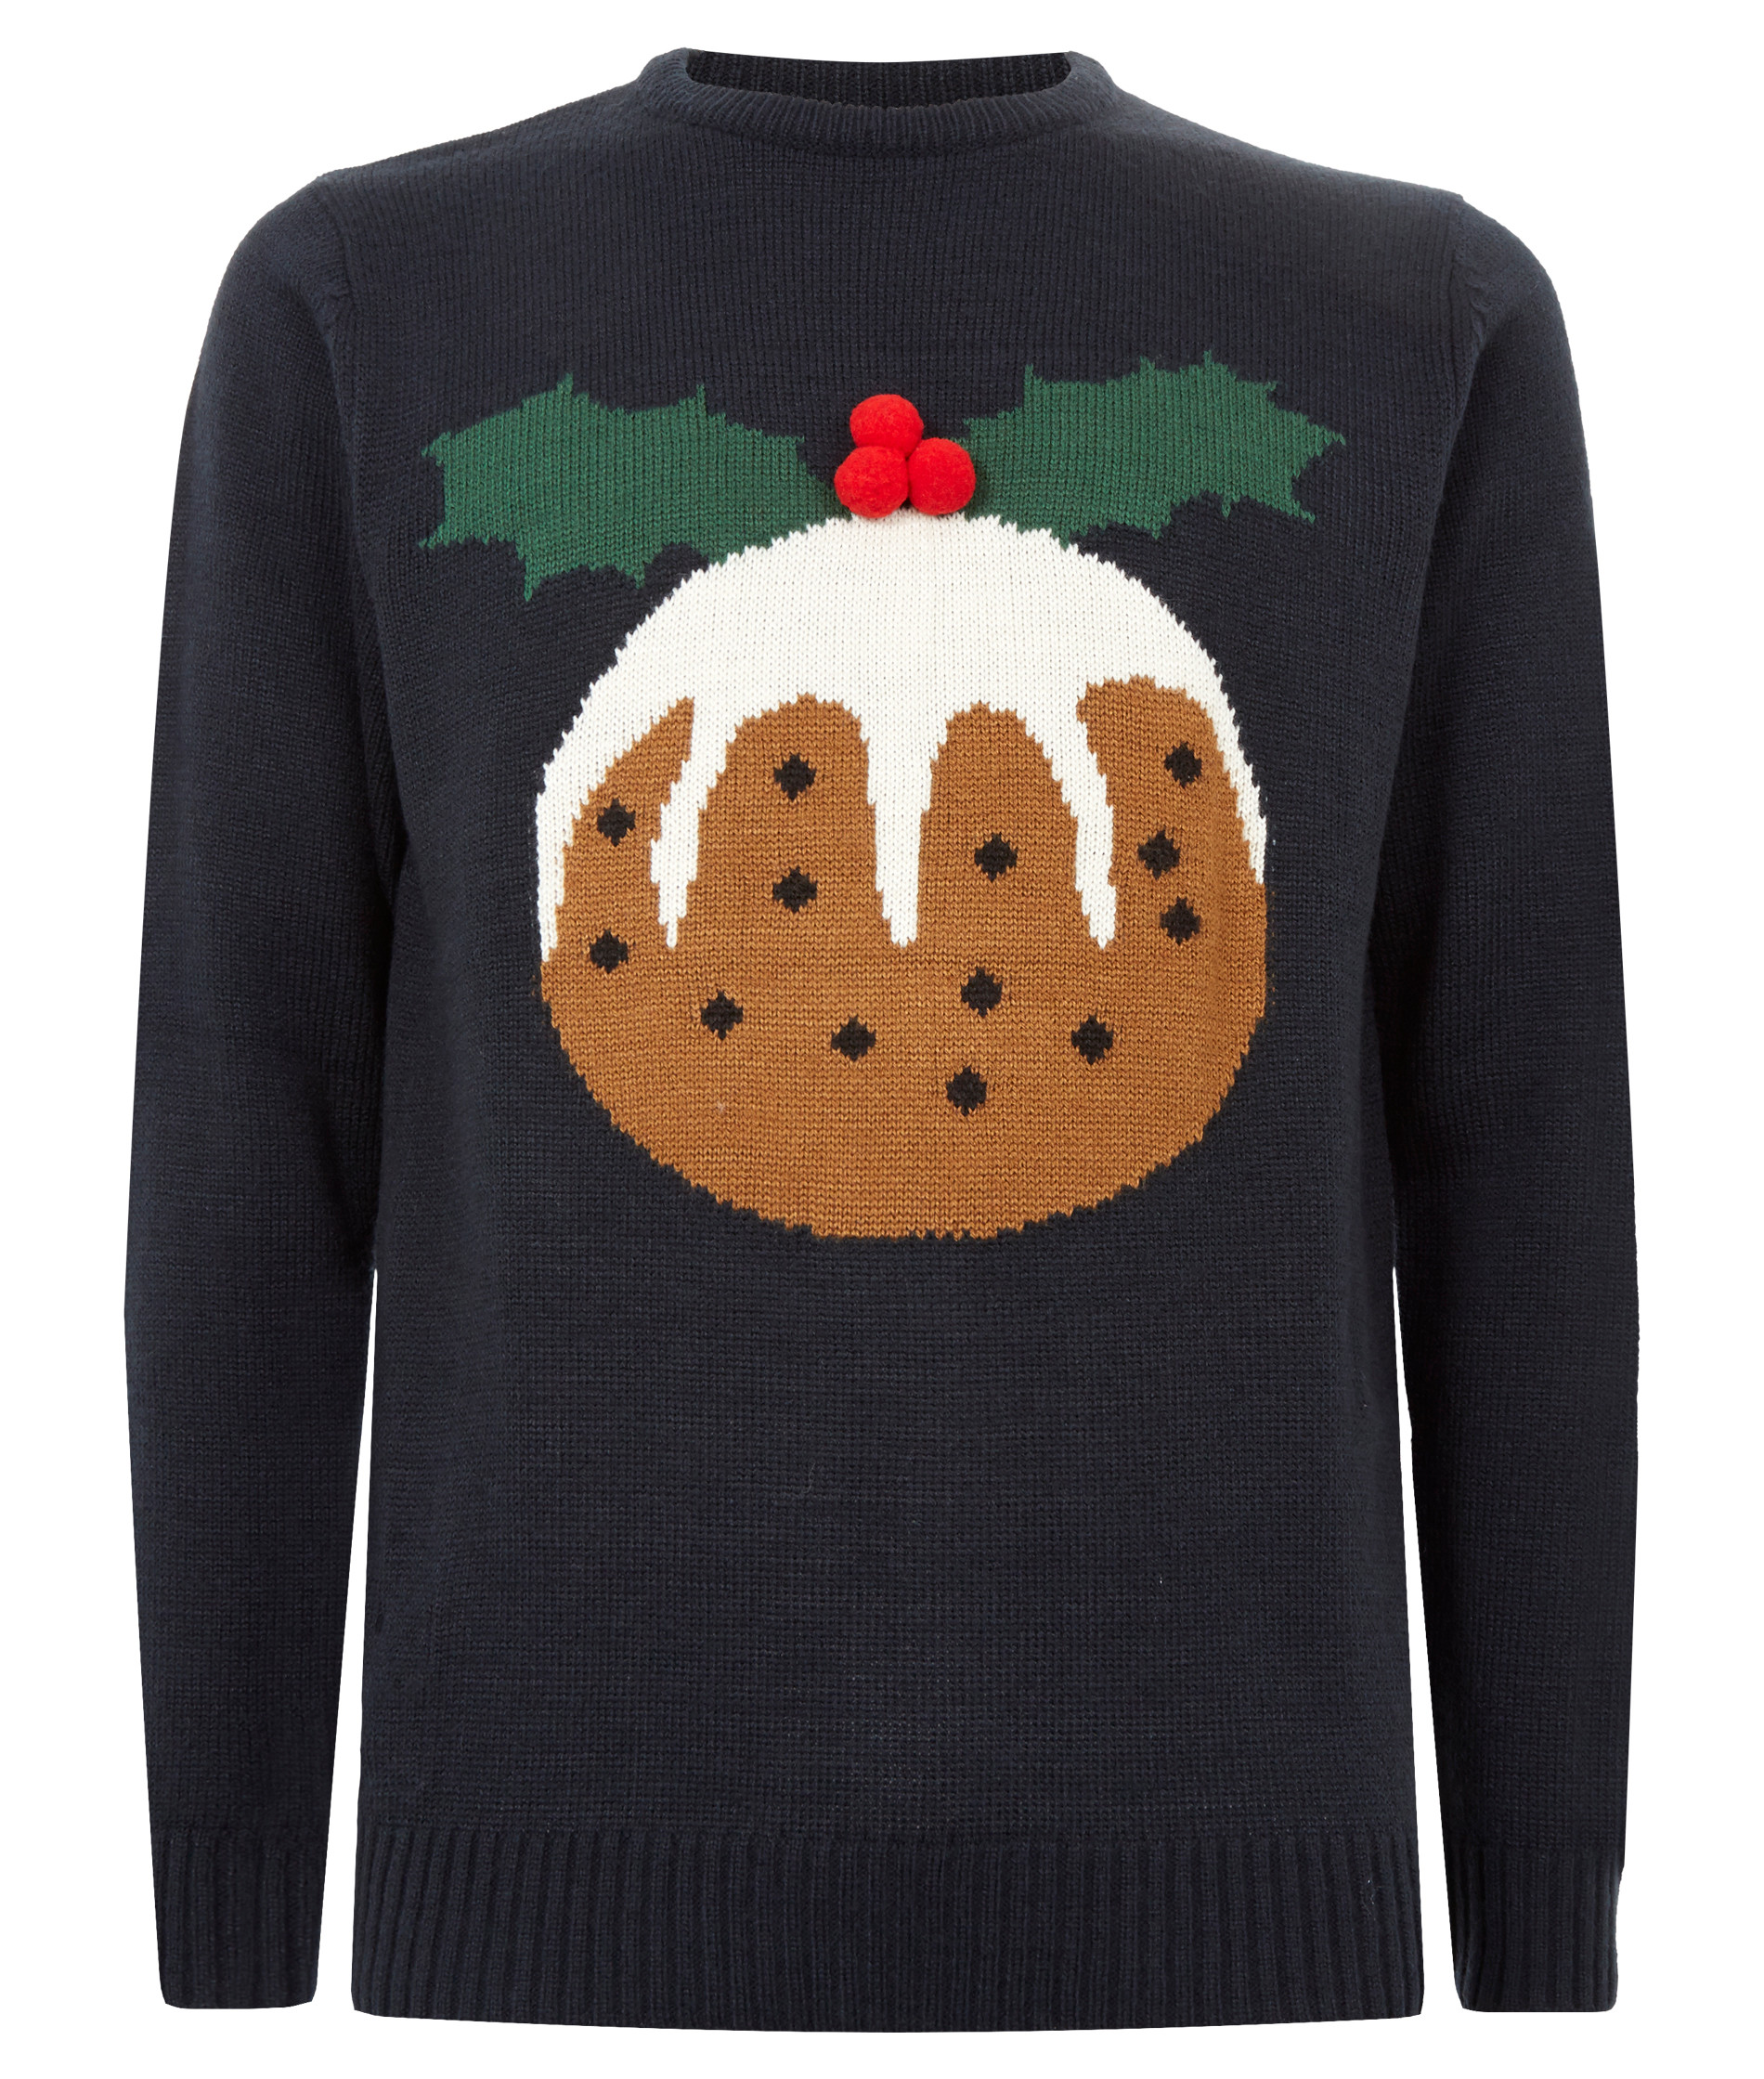 christmas jumper christmas jumpers are already available to buy now! or you could try making  your QQKJCVO